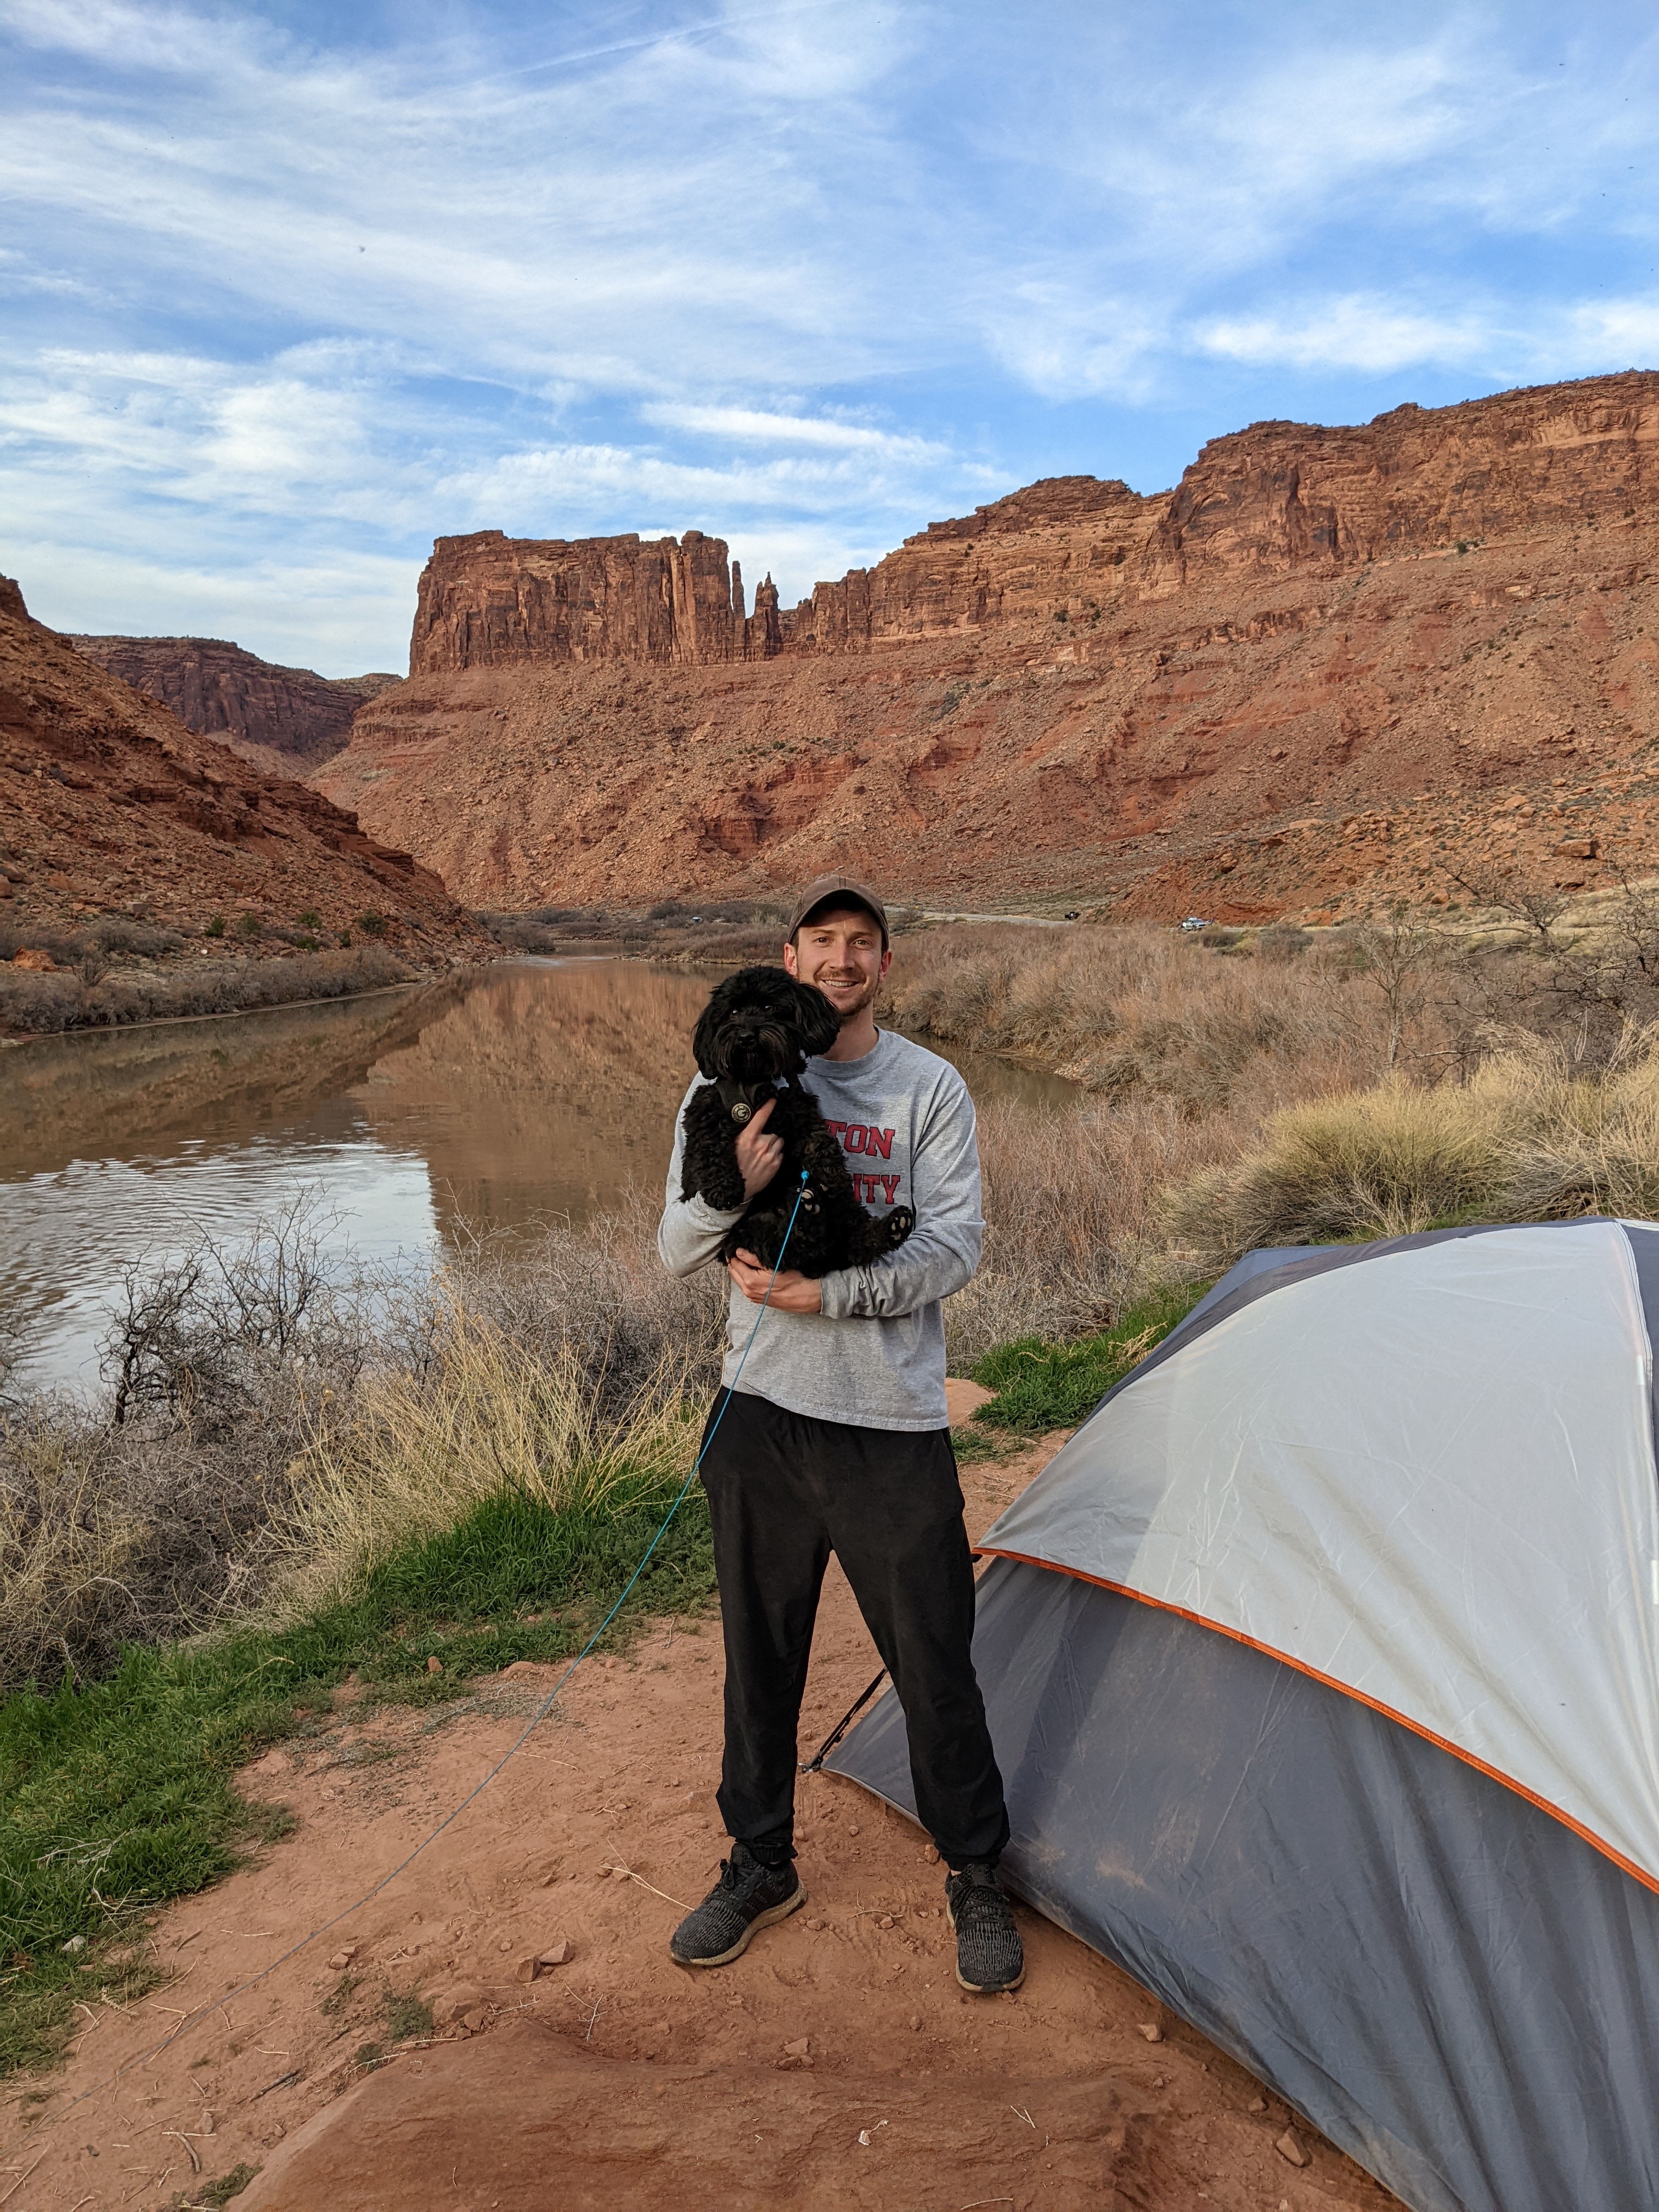 Camping with my dog in beautiful western Colorado!